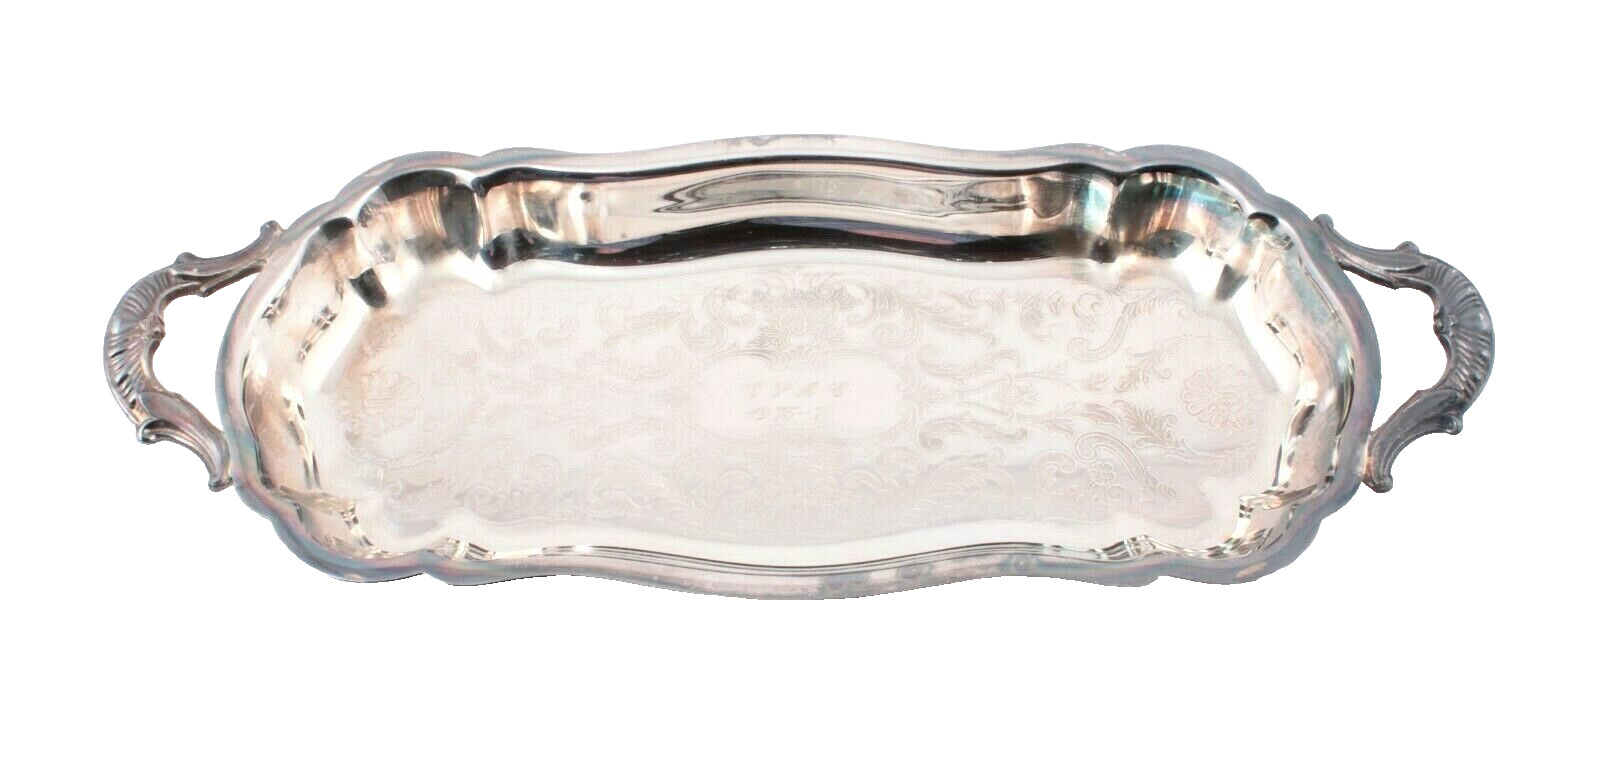 Silverplate Footed Tray With Engraving 13 X 6 Inches Bread or Rolls